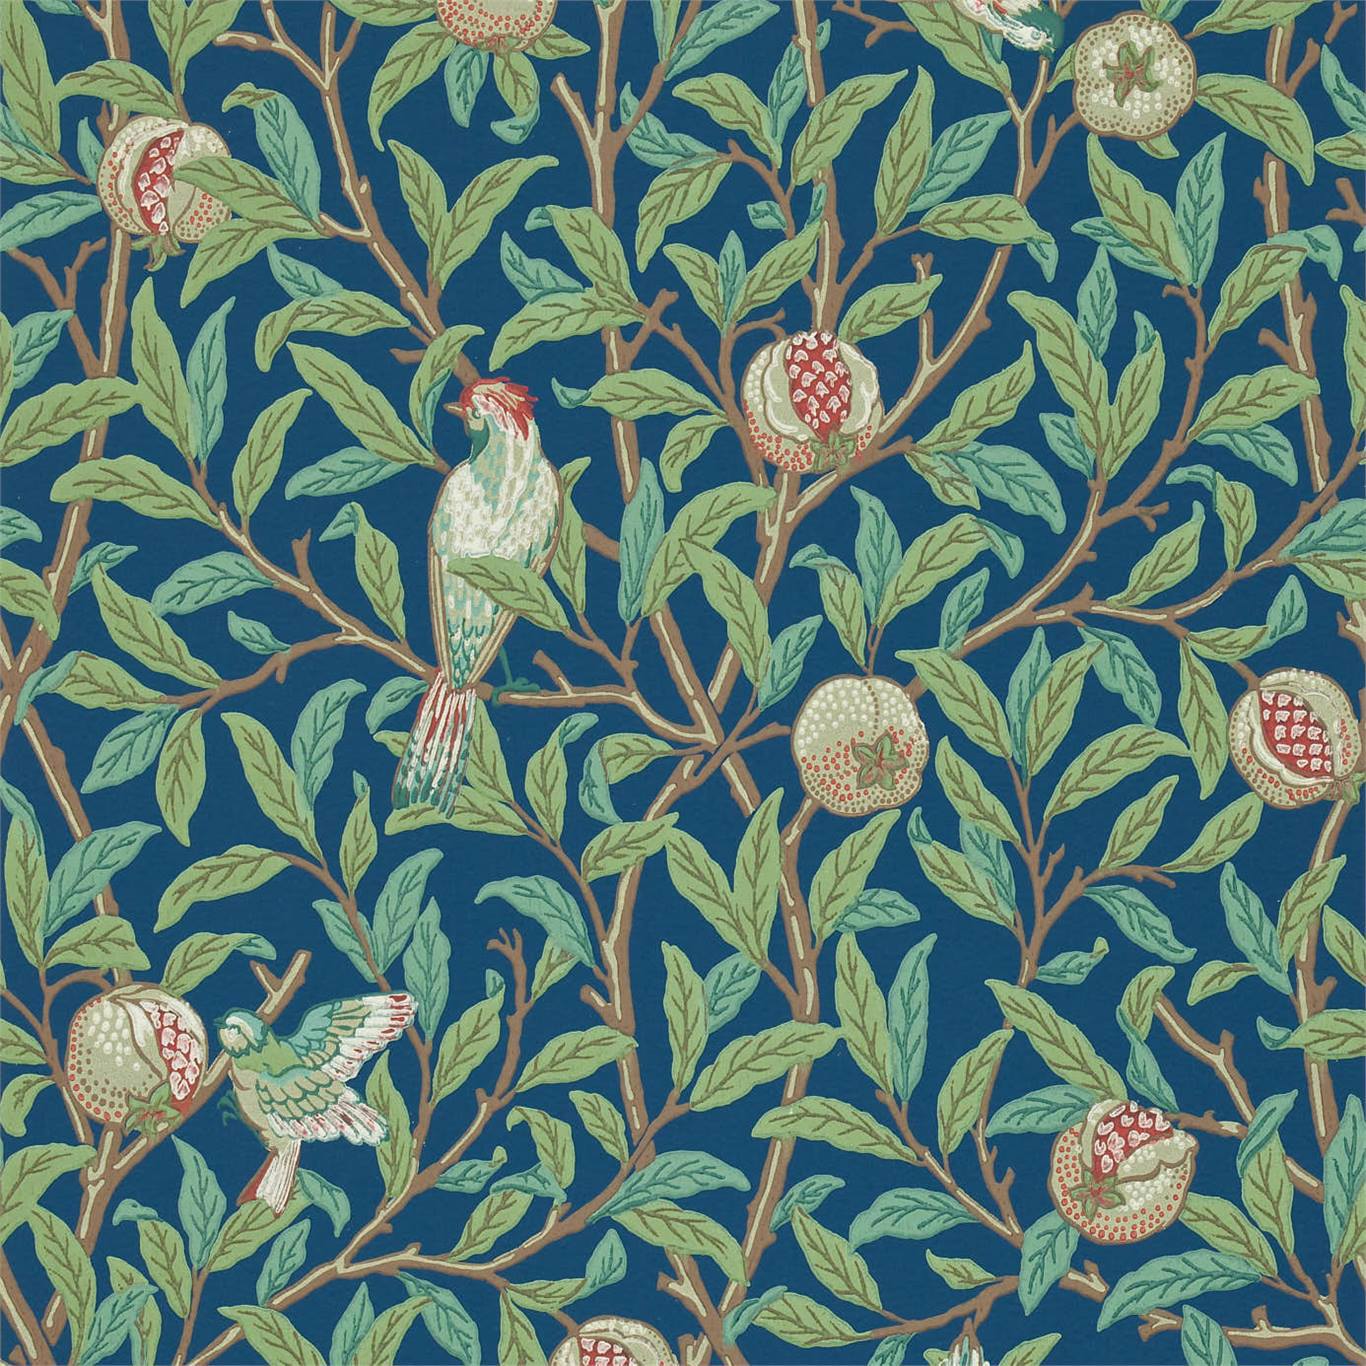 William Morris Bird And Pomegranate Wallpaper DCMW216815 by Morris & Co